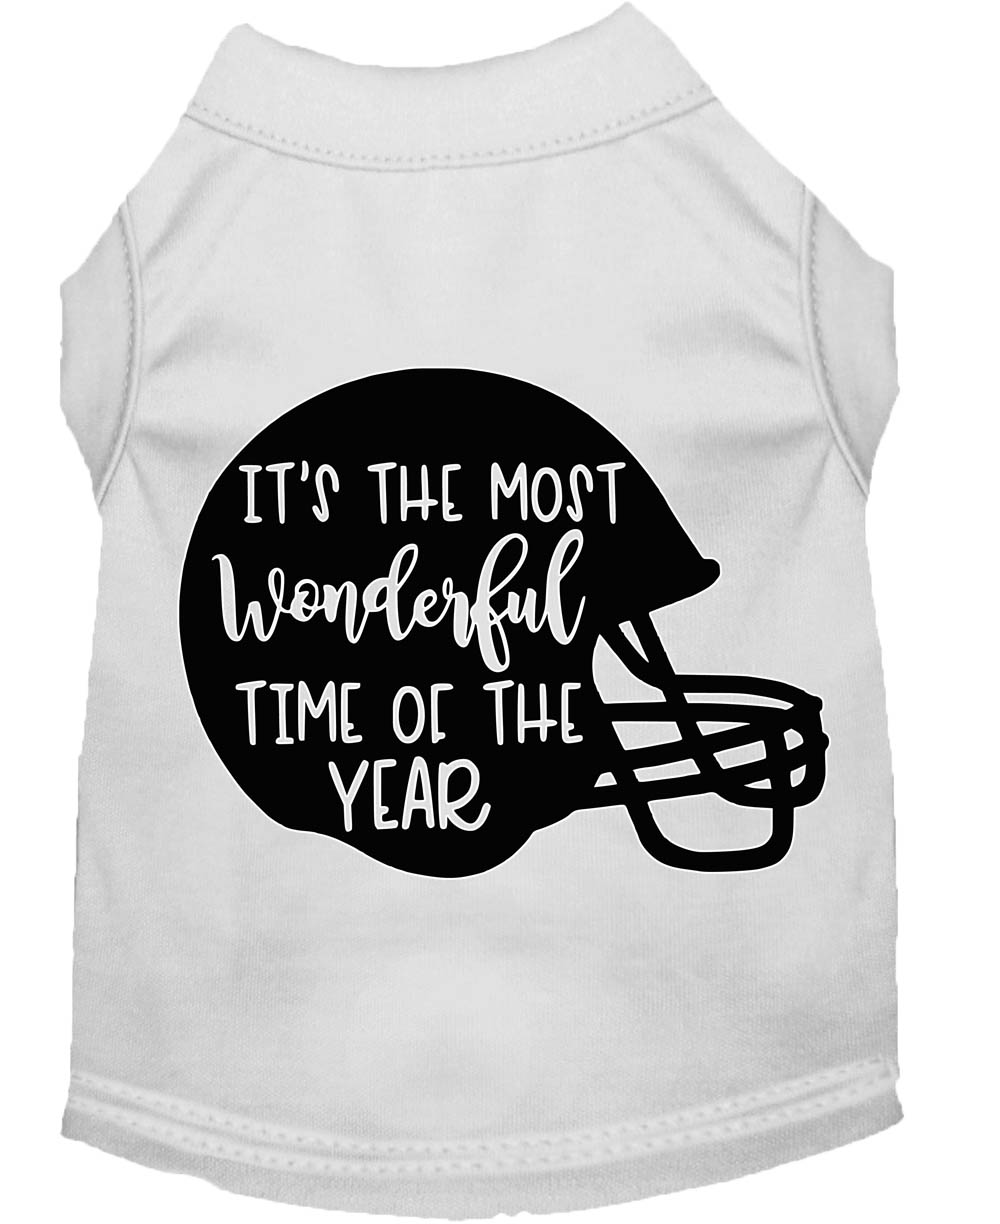 Most Wonderful Time of the Year (Football) Screen Print Dog Shirt White Med